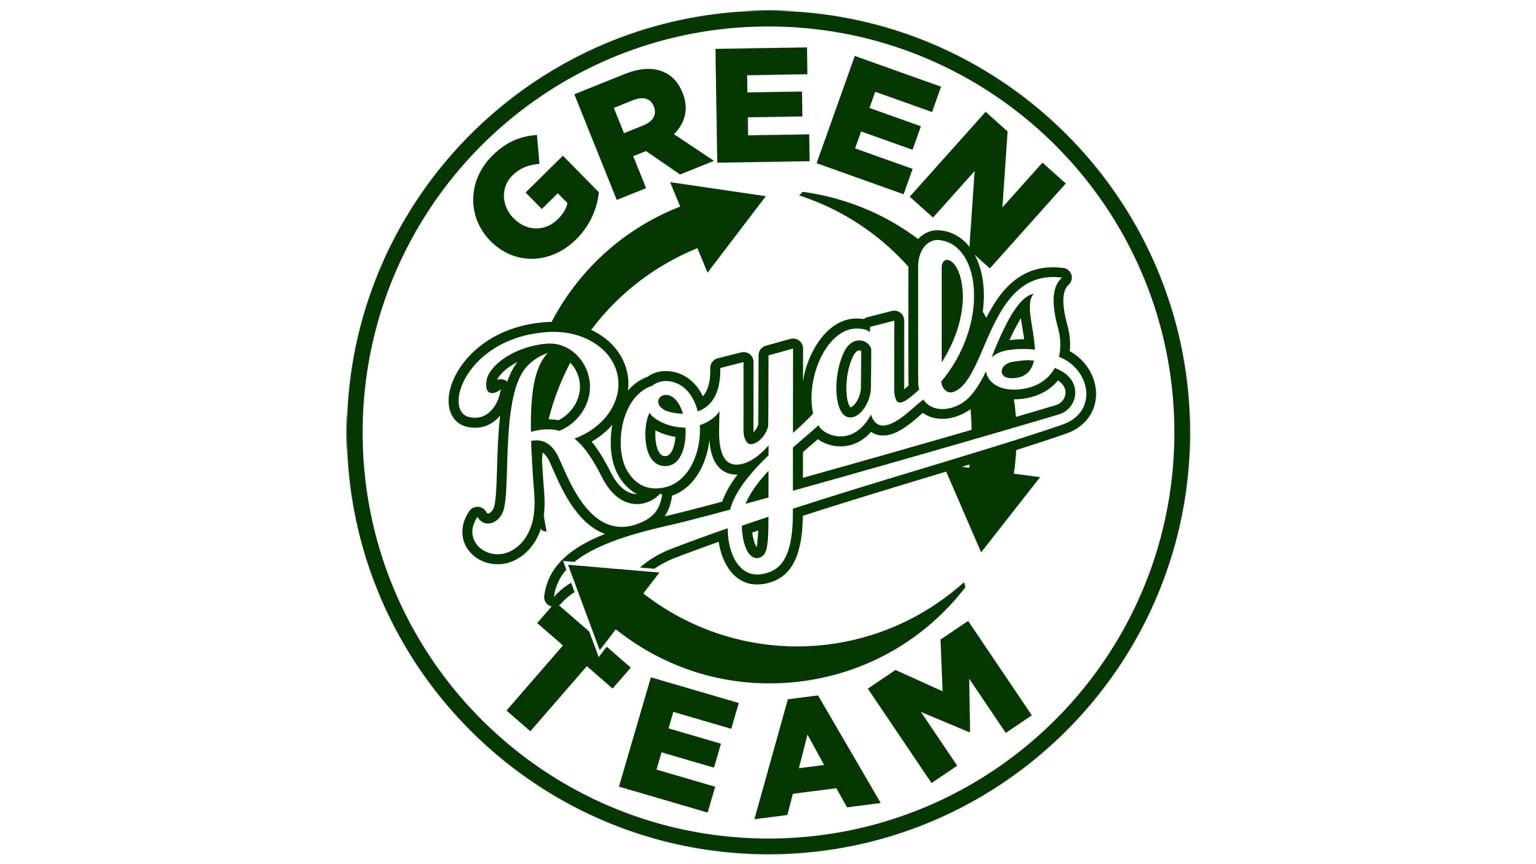 The best things in life always come in green… Kansas City Royals